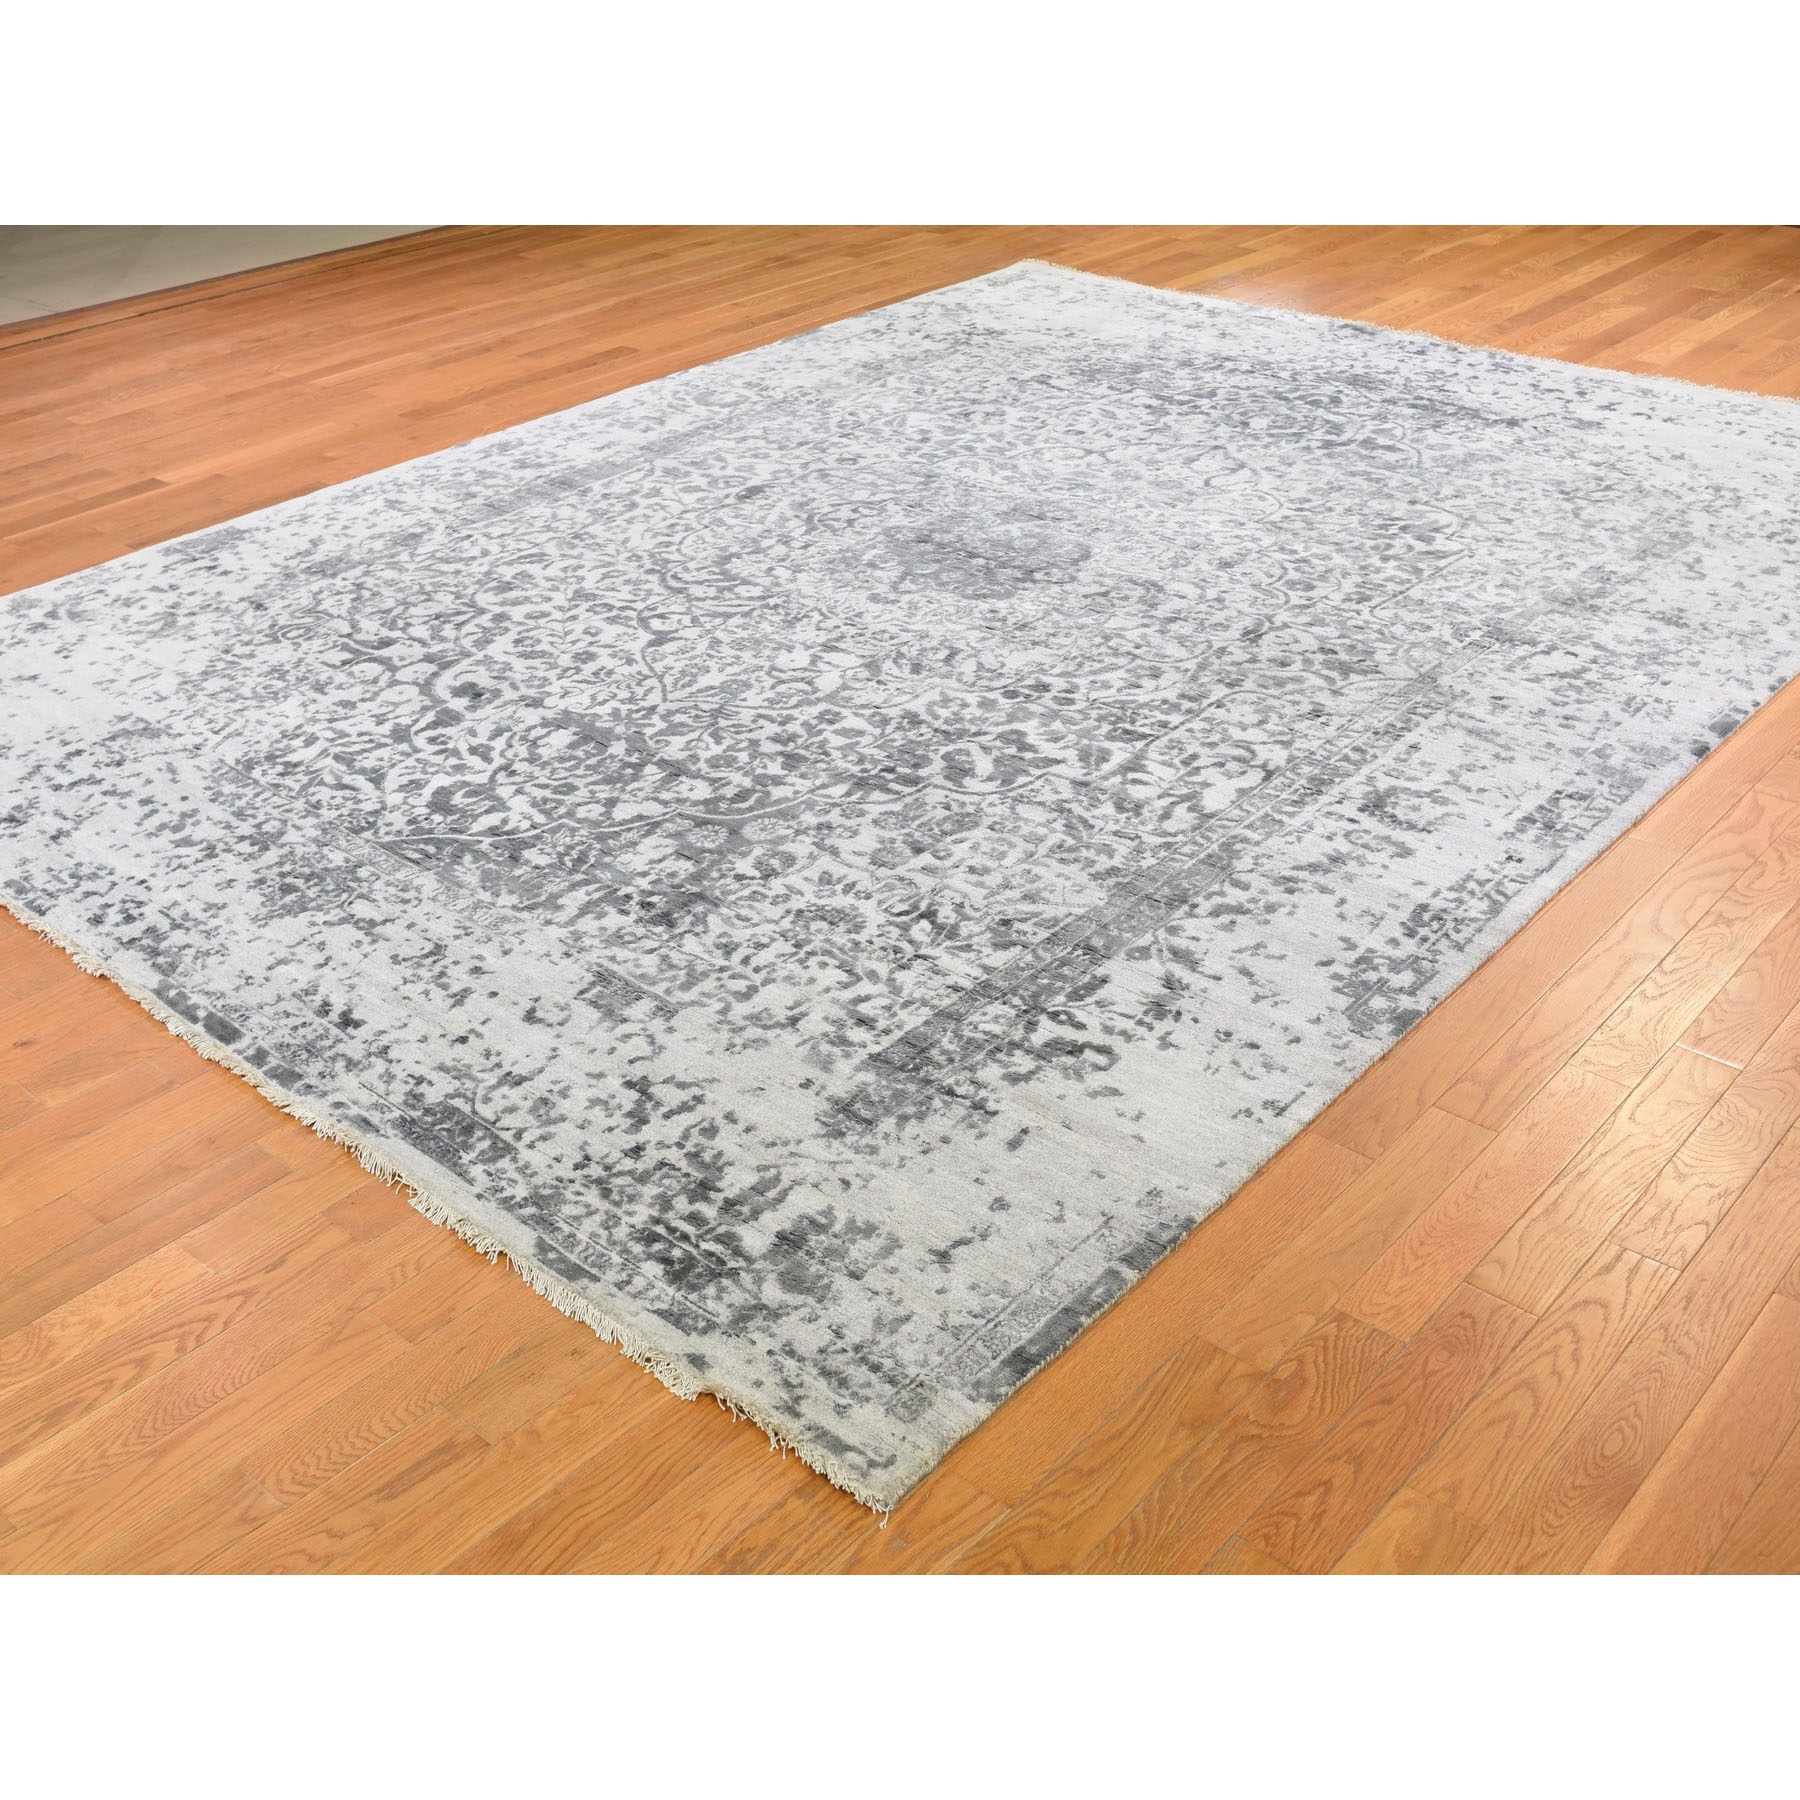 9-x12- Silver-Dark Gray Erased Persian Design Wool and Pure Silk Hand Knotted Oriental Rug 